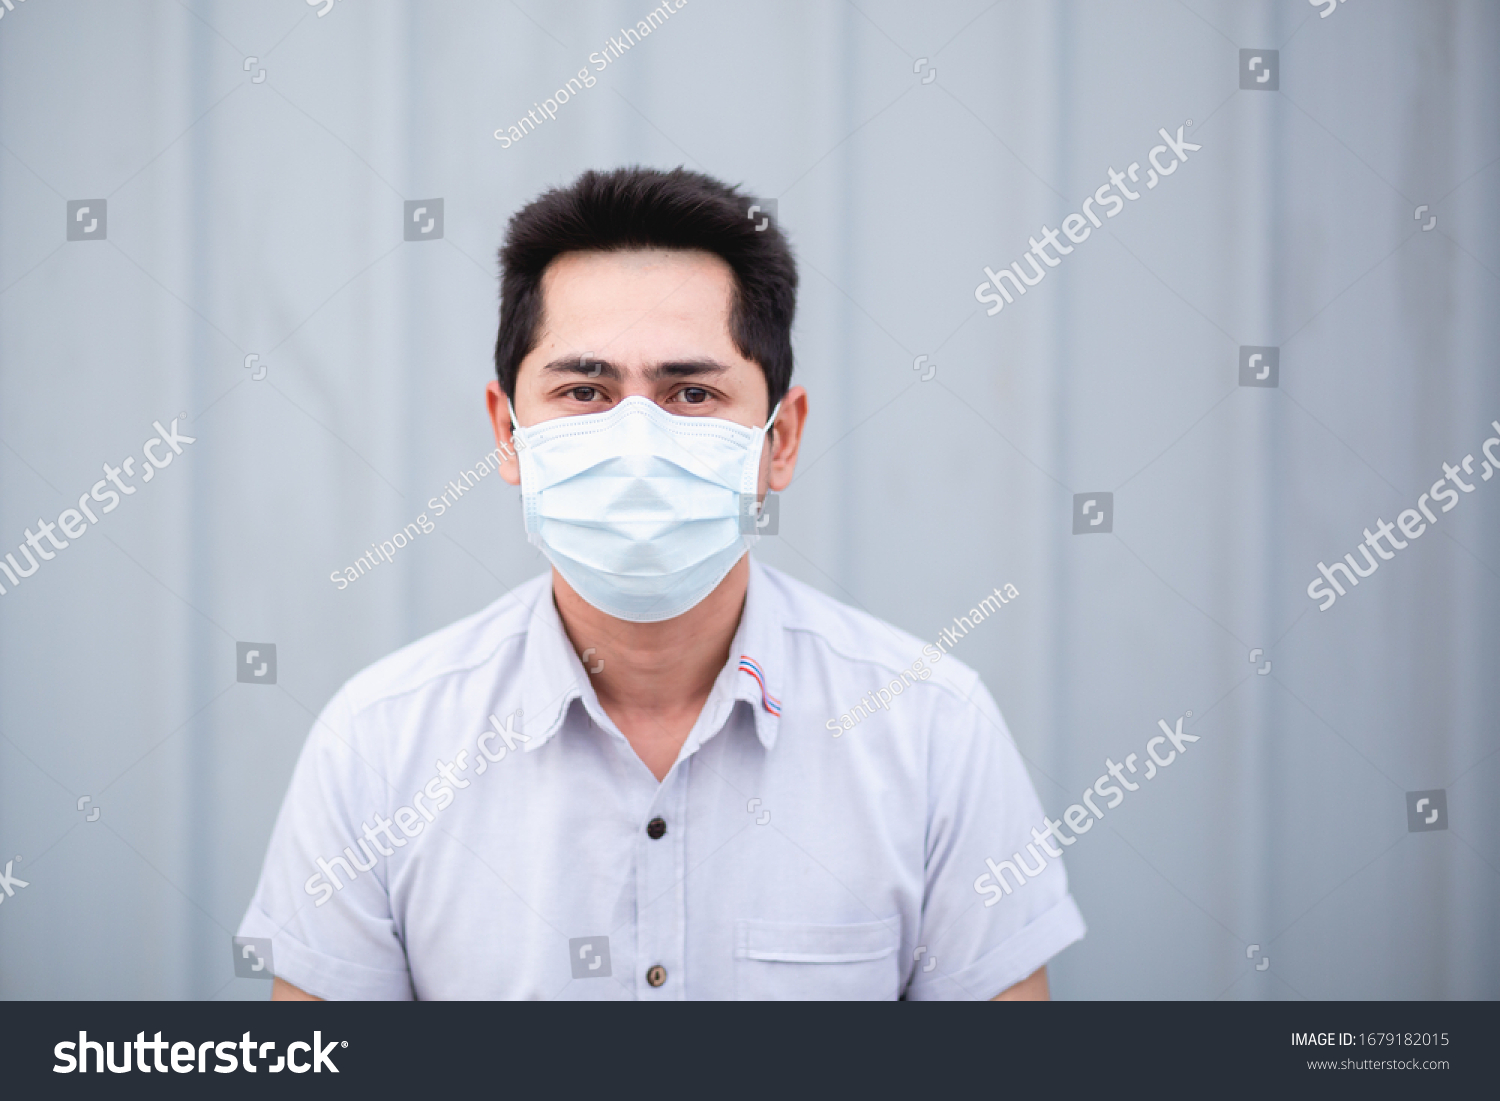 Protect self from virus. Asian man wearing face mask to protect himself from any virus or pollution.  #1679182015